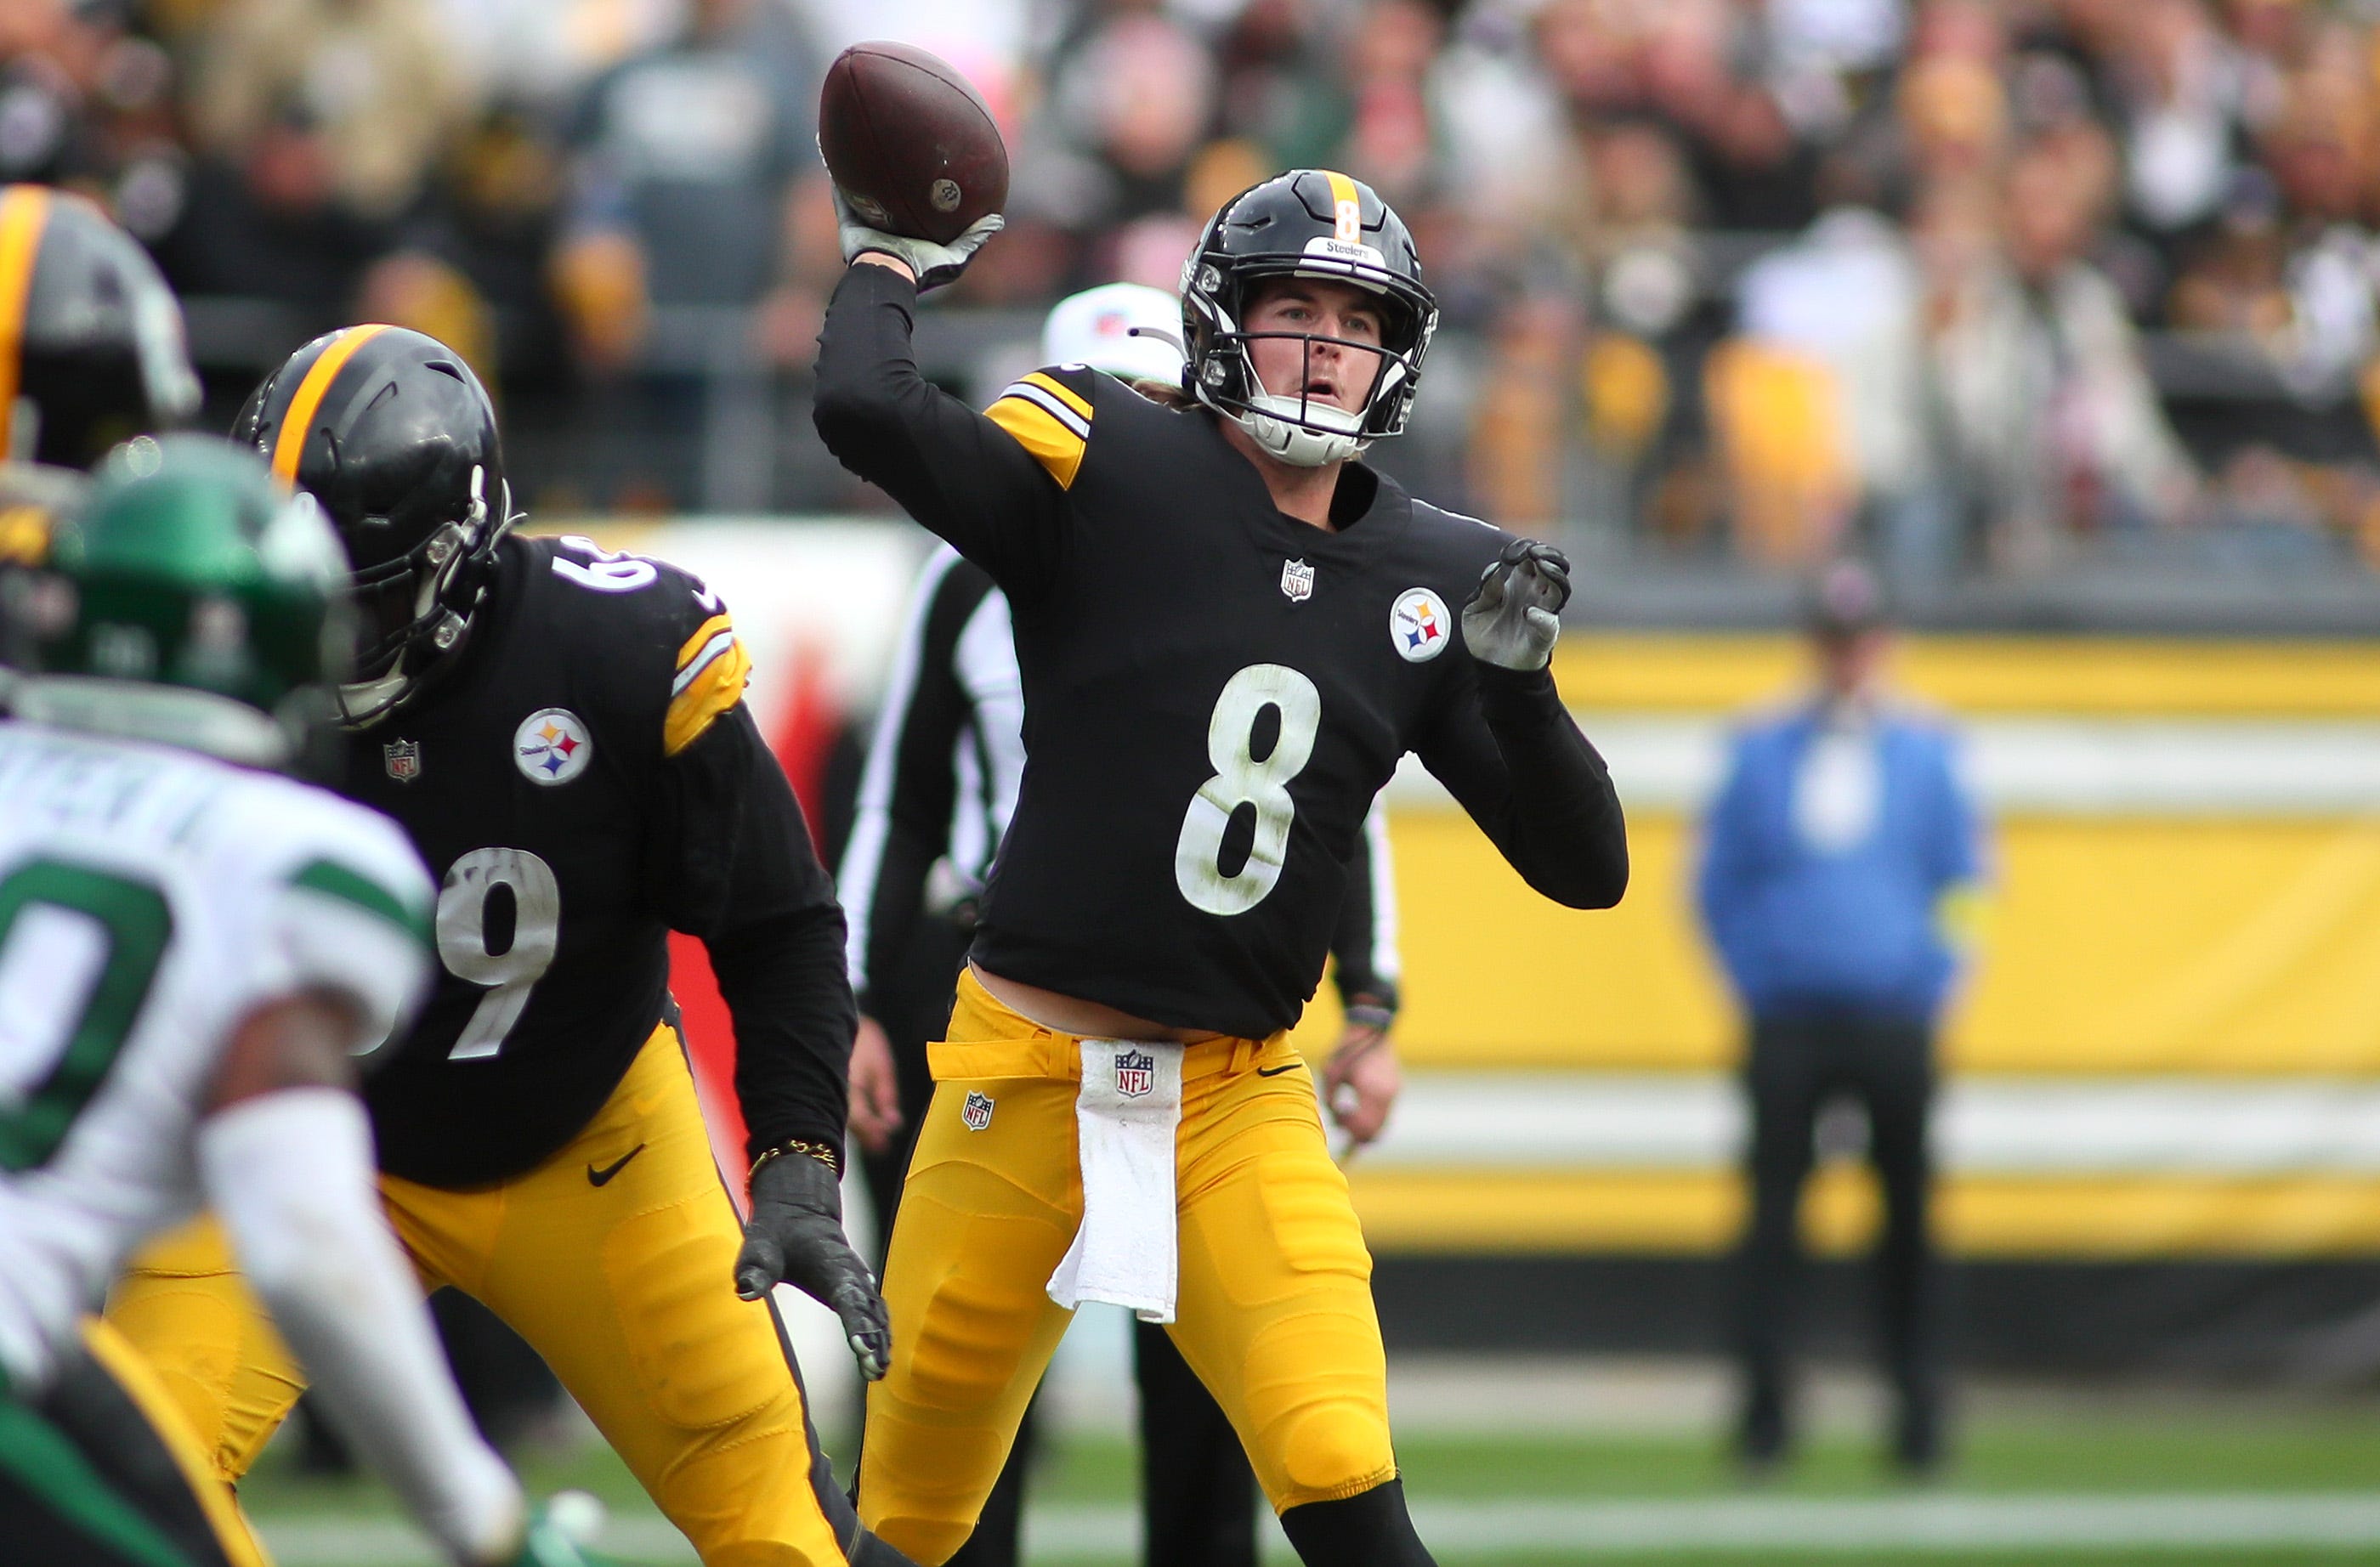 Why You Should Bet On The Steelers To Make The Playoffs